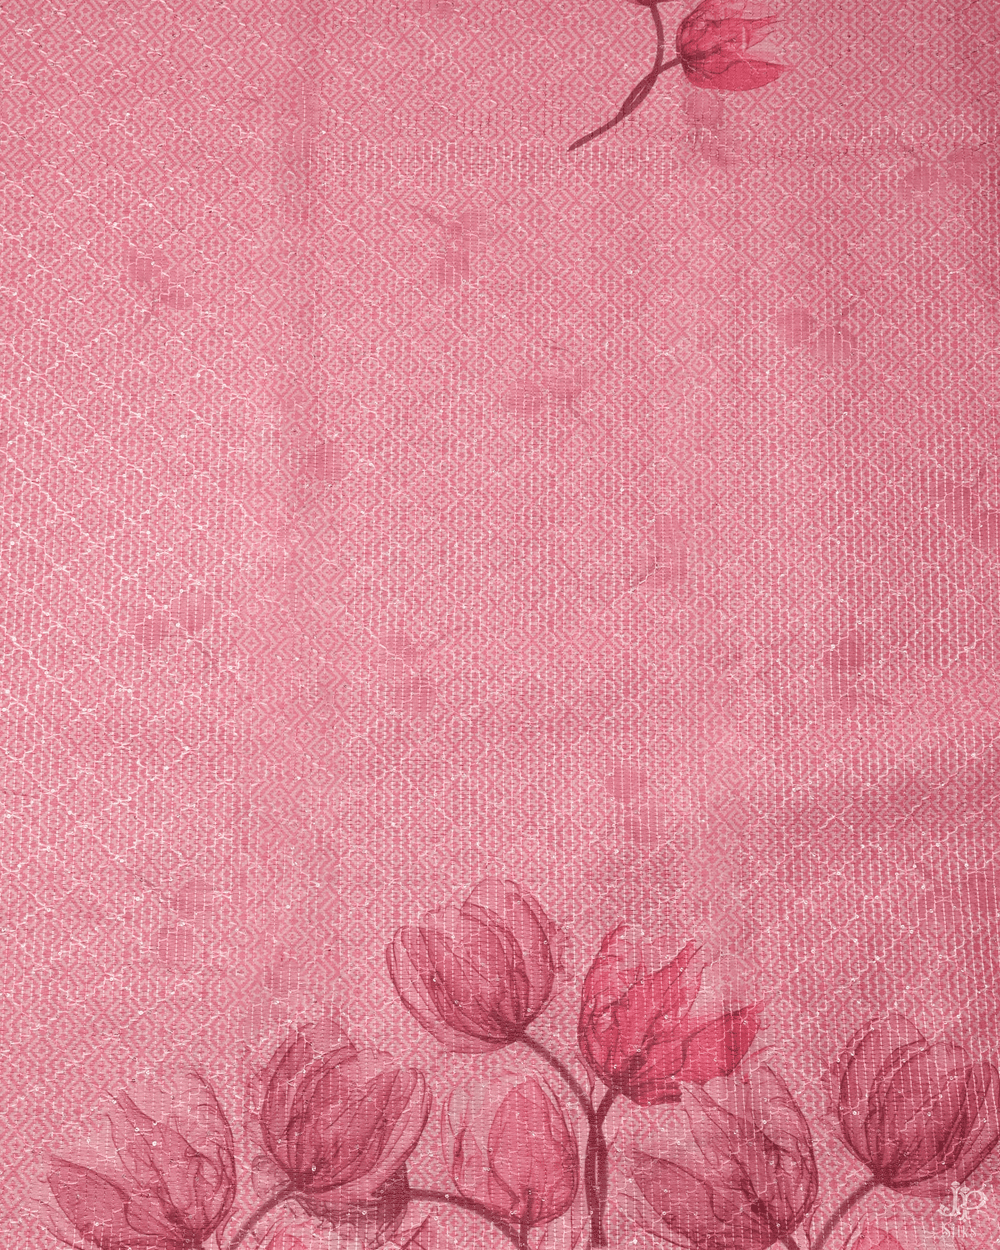 Onion Pink Unstitched Chudidhar Material - D5276 - View 4